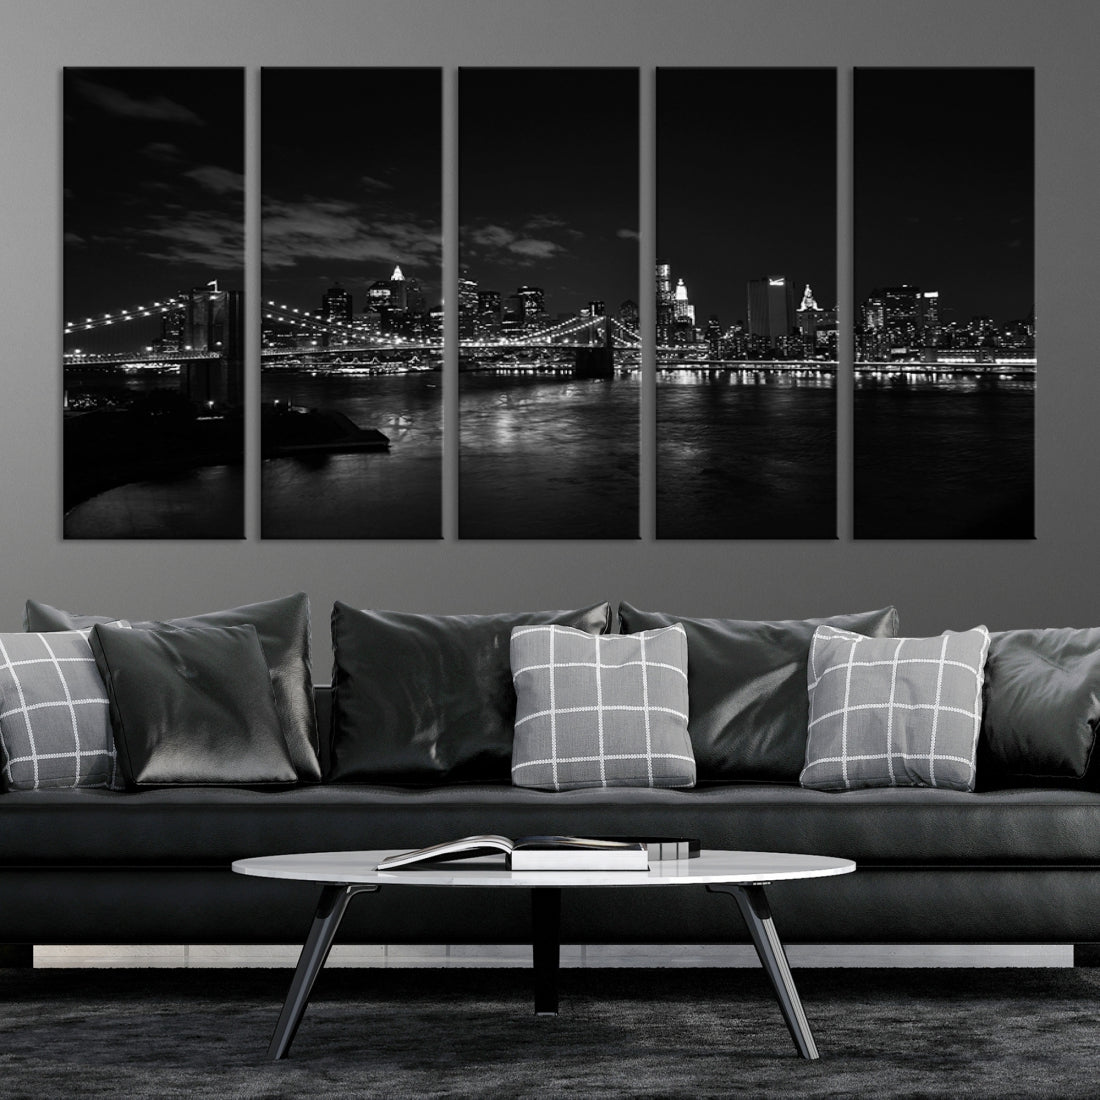 Large Wall Art NEW YORK Canvas Prints - Black and White New York and Brooklyn Bridge Landscape at Night